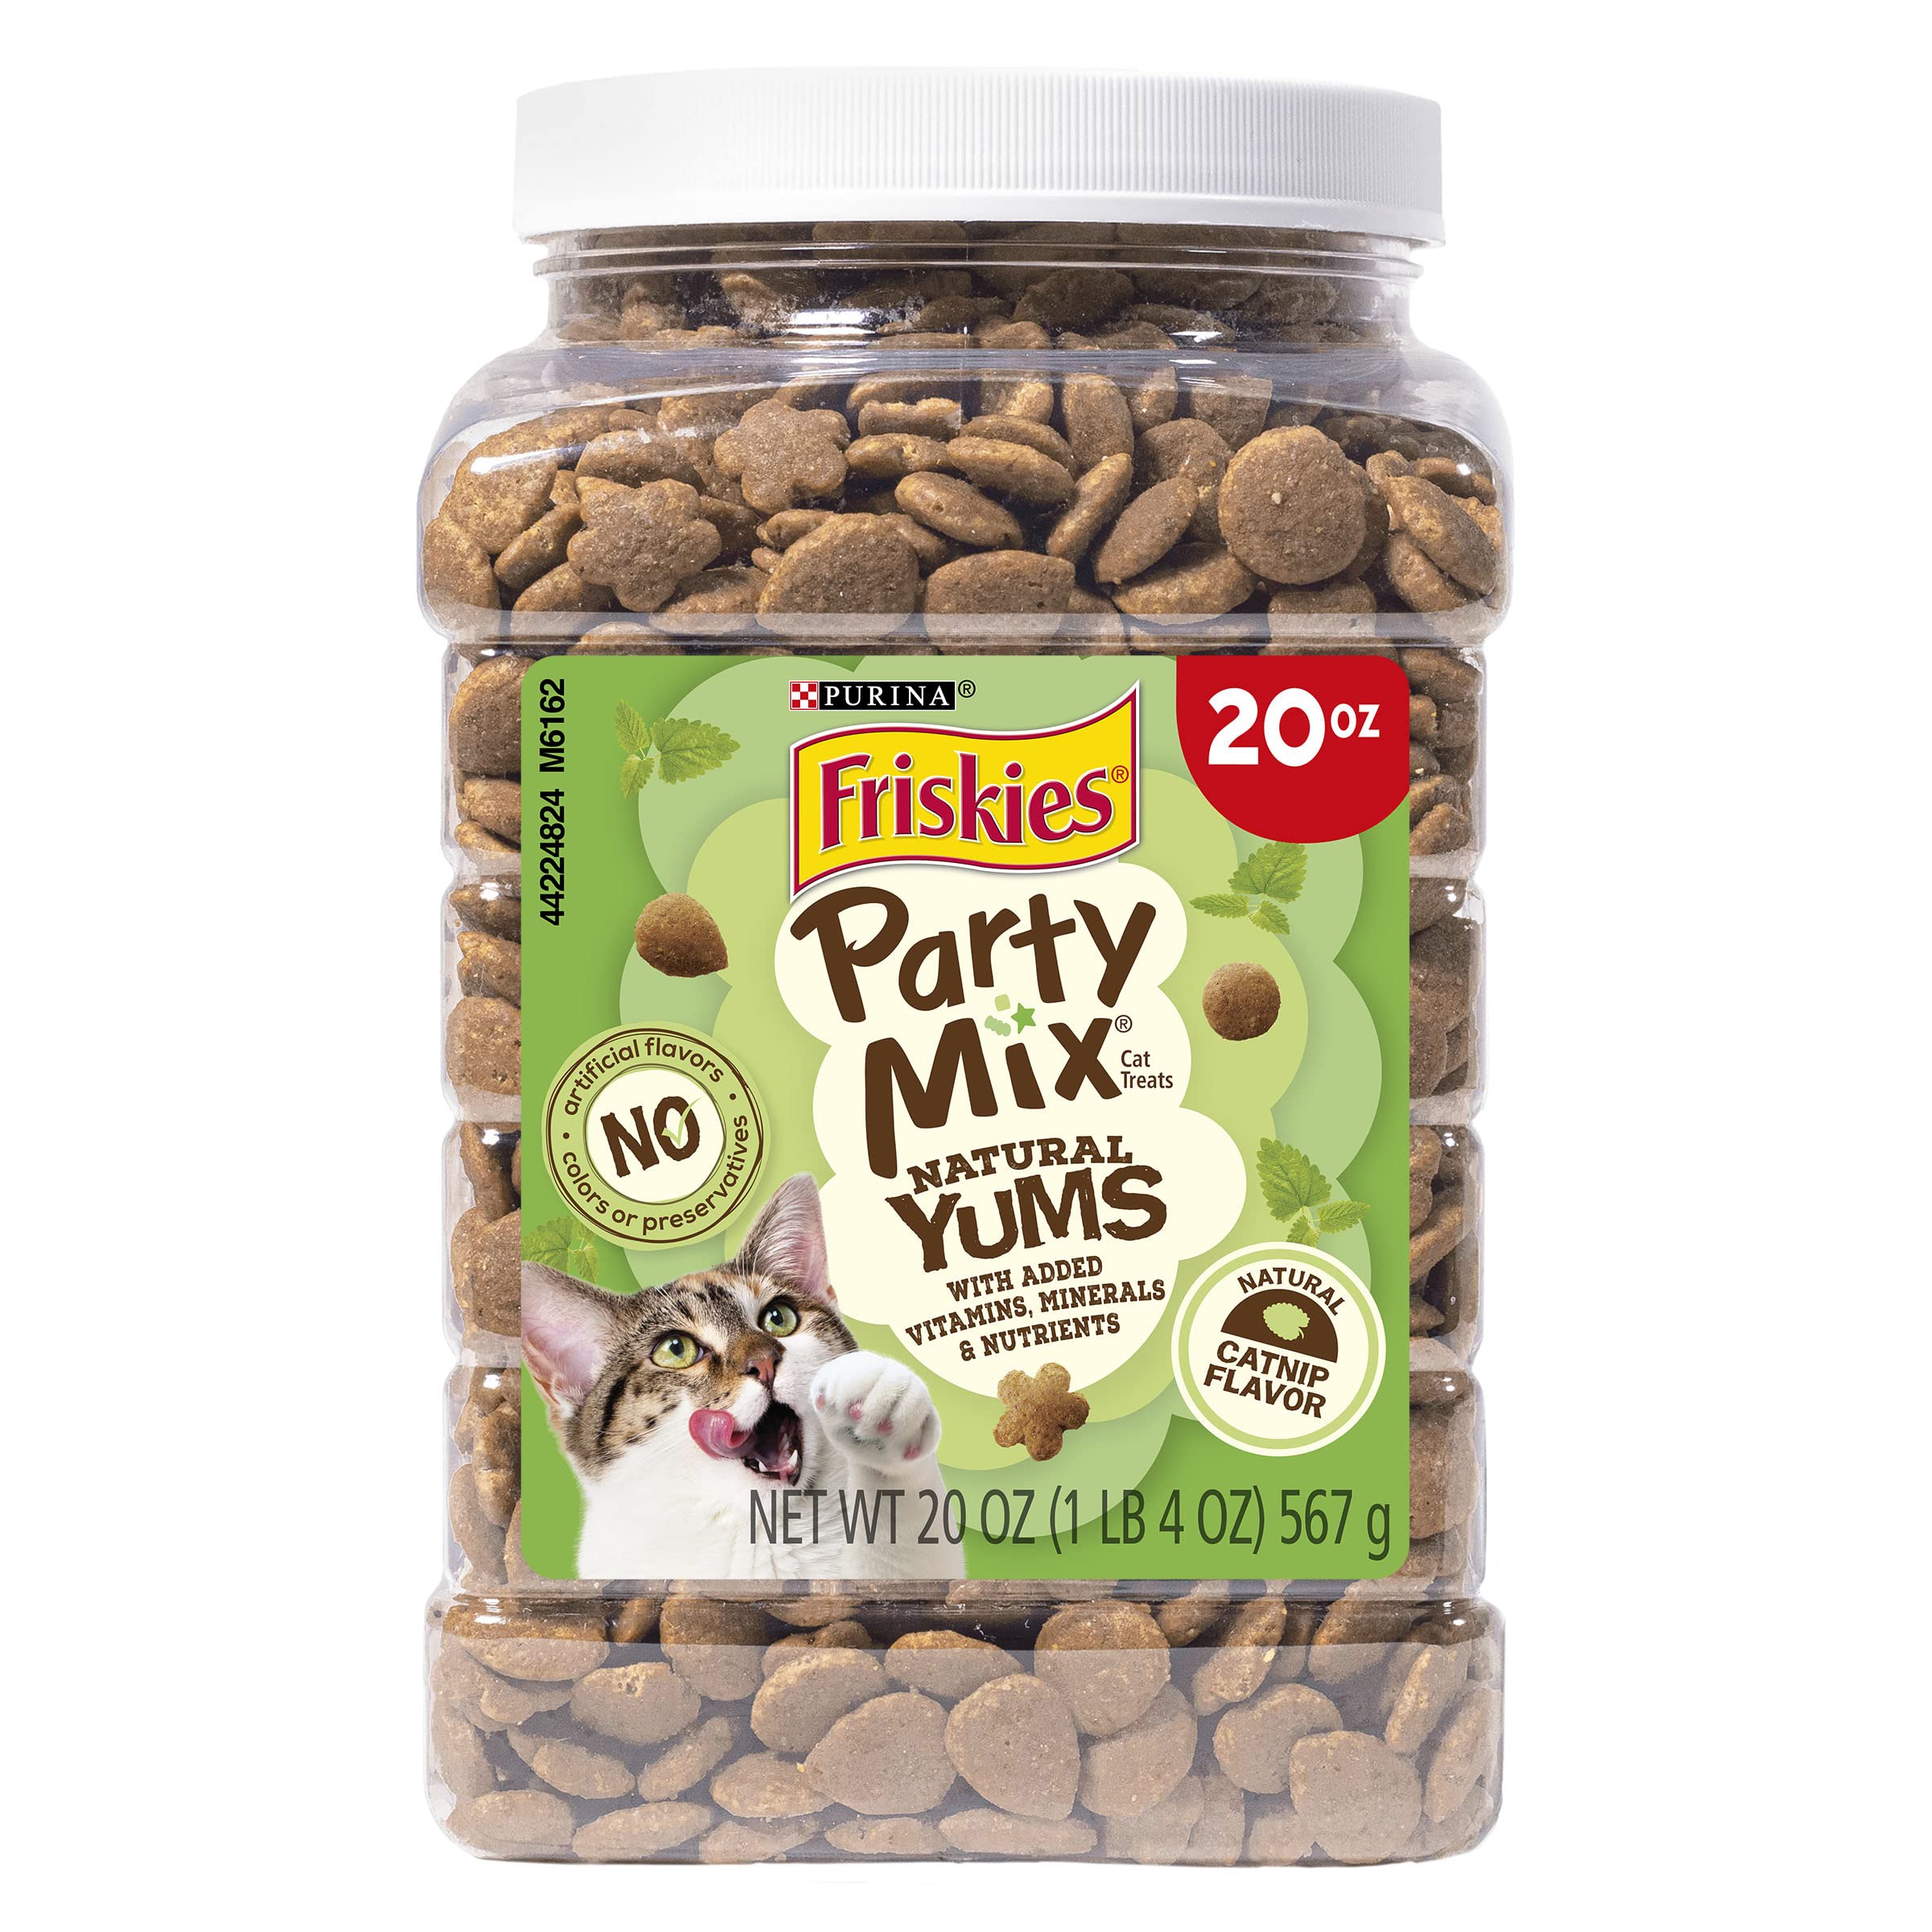 20-Oz Purina Friskies Natural Cat Treats (Catnip) $4.19 w/ S&S + Shipping is free w/ Prime or on 35+